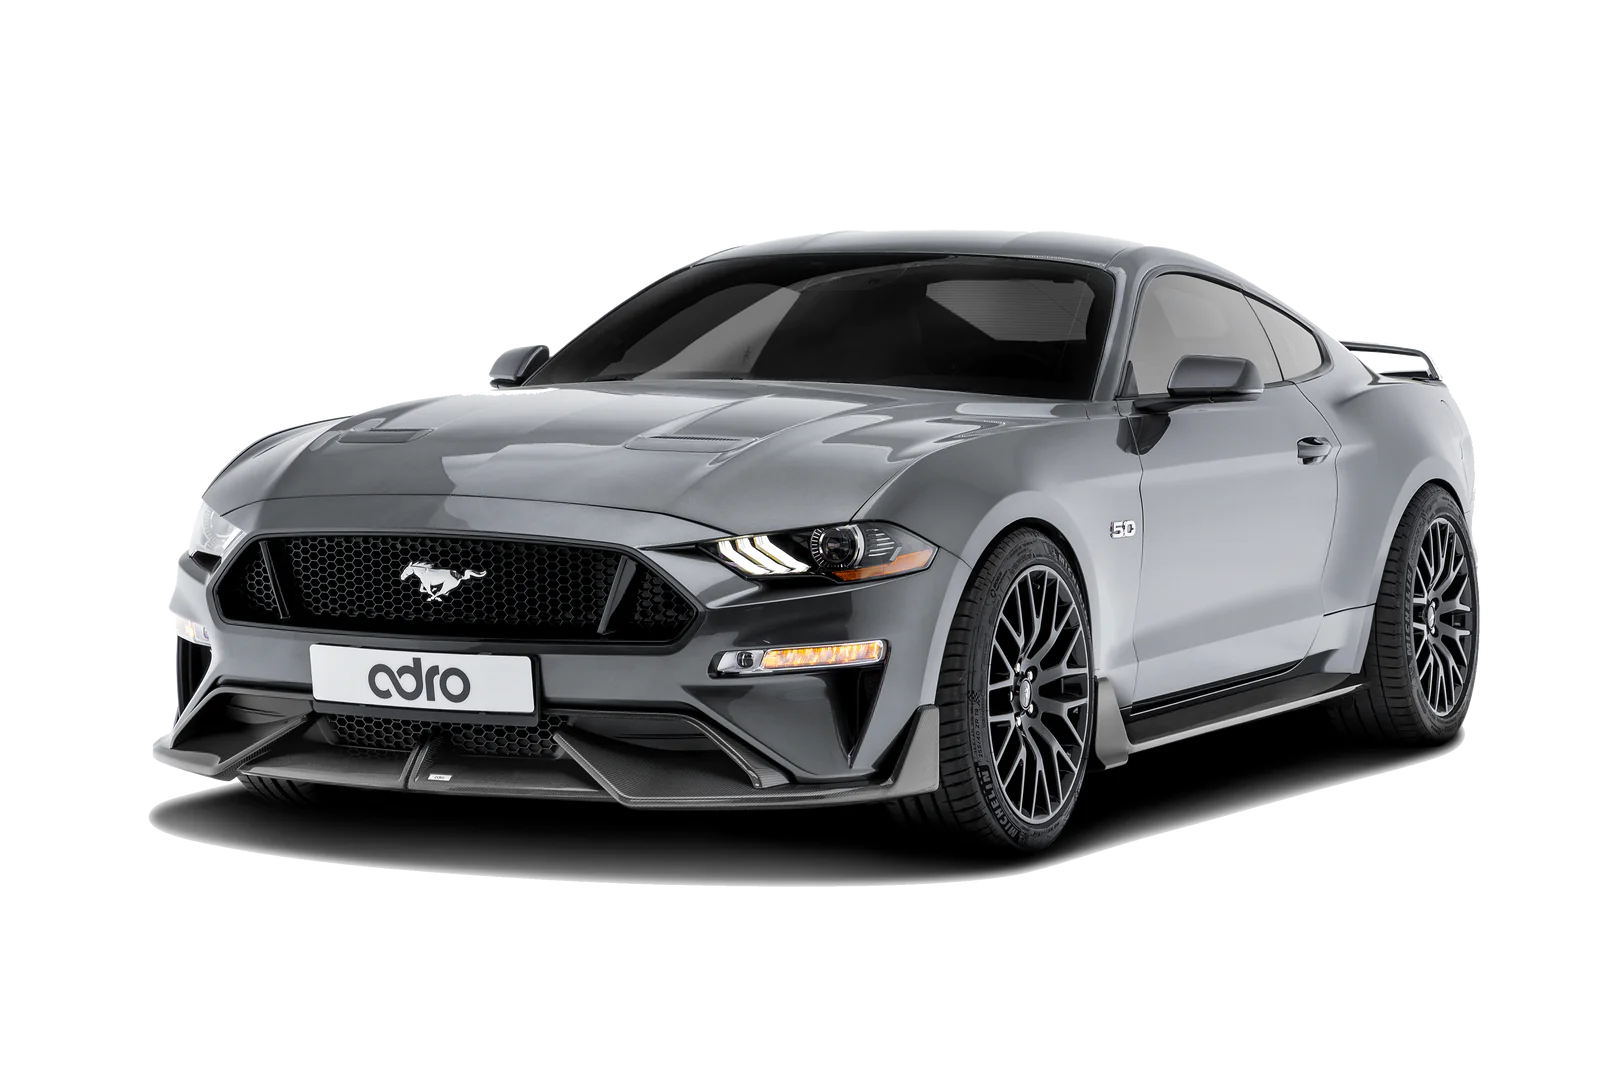 Ford Mustang Carbon Fibre Front Splitter by Adro (2018+), Front Lips & Splitters, Adro - AUTOID | Premium Automotive Accessories